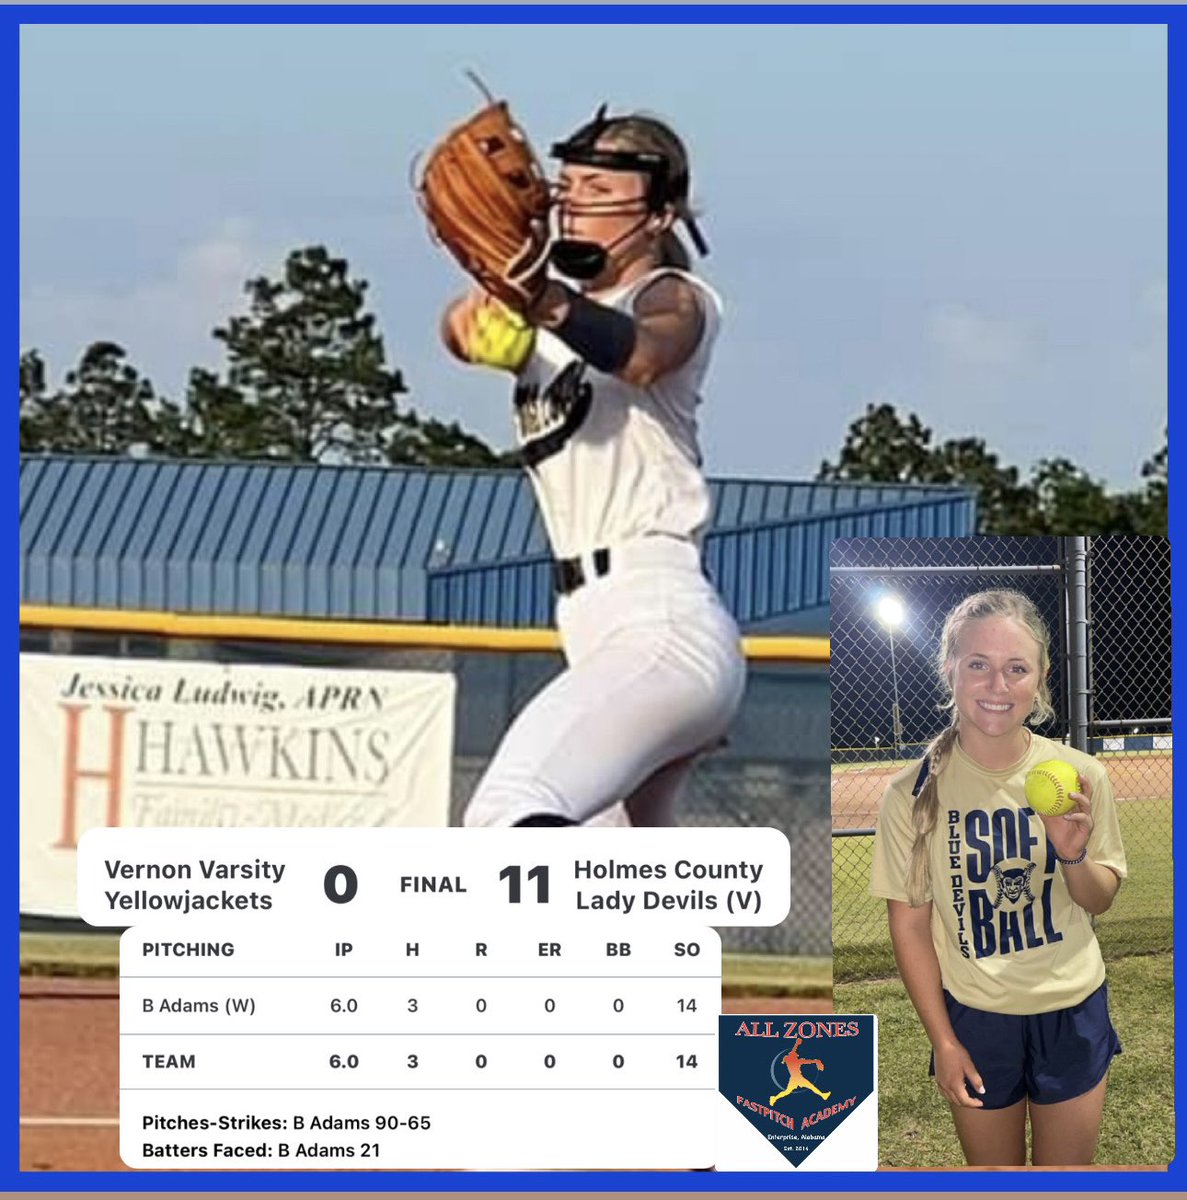 Bri Adams (2025 - UWF committed) with another gem in the circle to lead Holmes County to a district championship.. Great work Bri and keep spinning it!!!! @briannaadms11 @UWFSoftball #FullSteamAhead🚂🚂 #showupandshowout